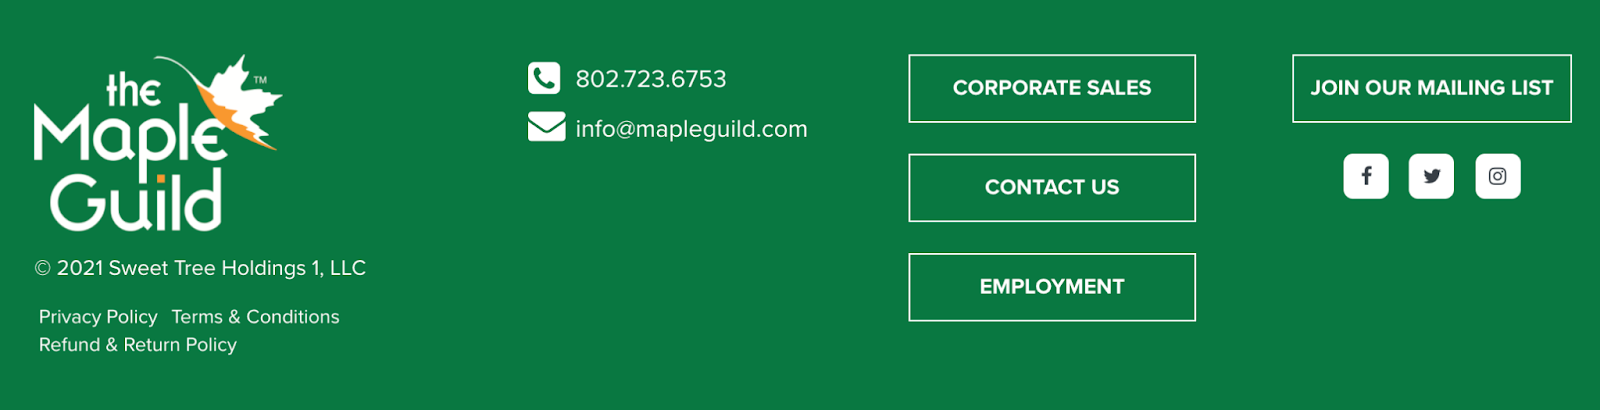 the Maple Guild contact details.